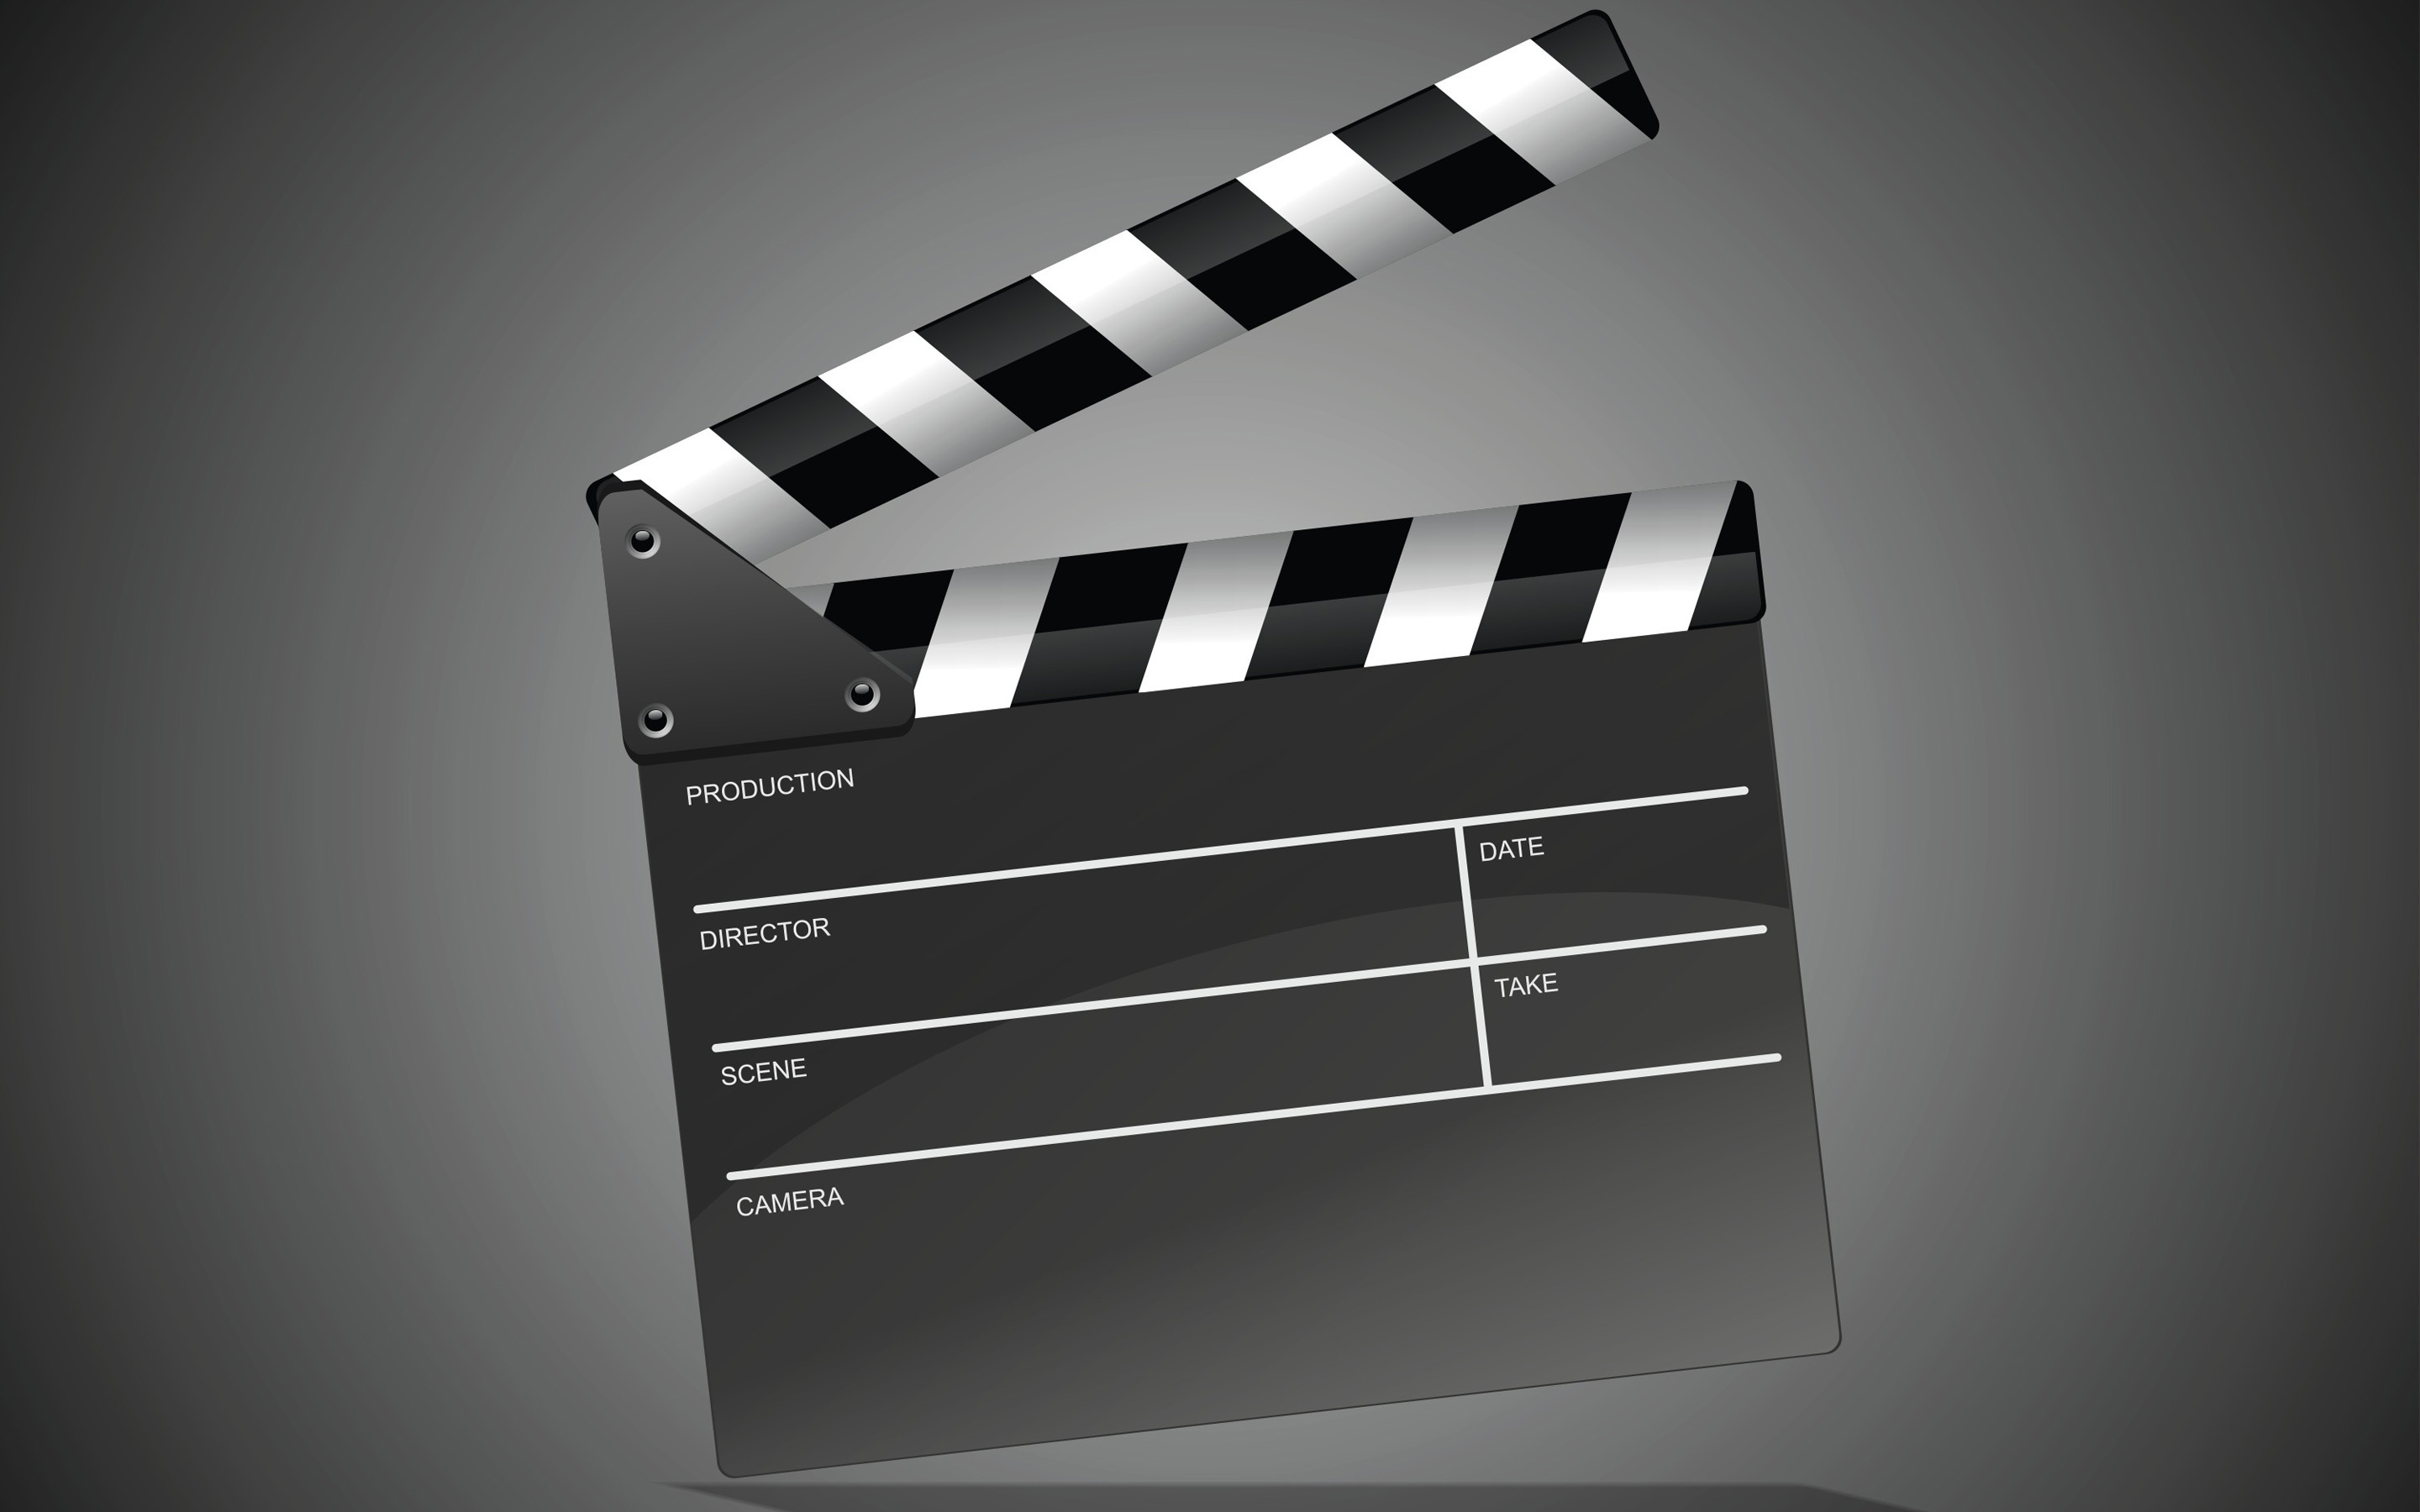 Download wallpaper Clapperboard, cinema concepts, cinema sign, clapperboard concept, Clapperboard on gray background for desktop with resolution 2880x1800. High Quality HD picture wallpaper